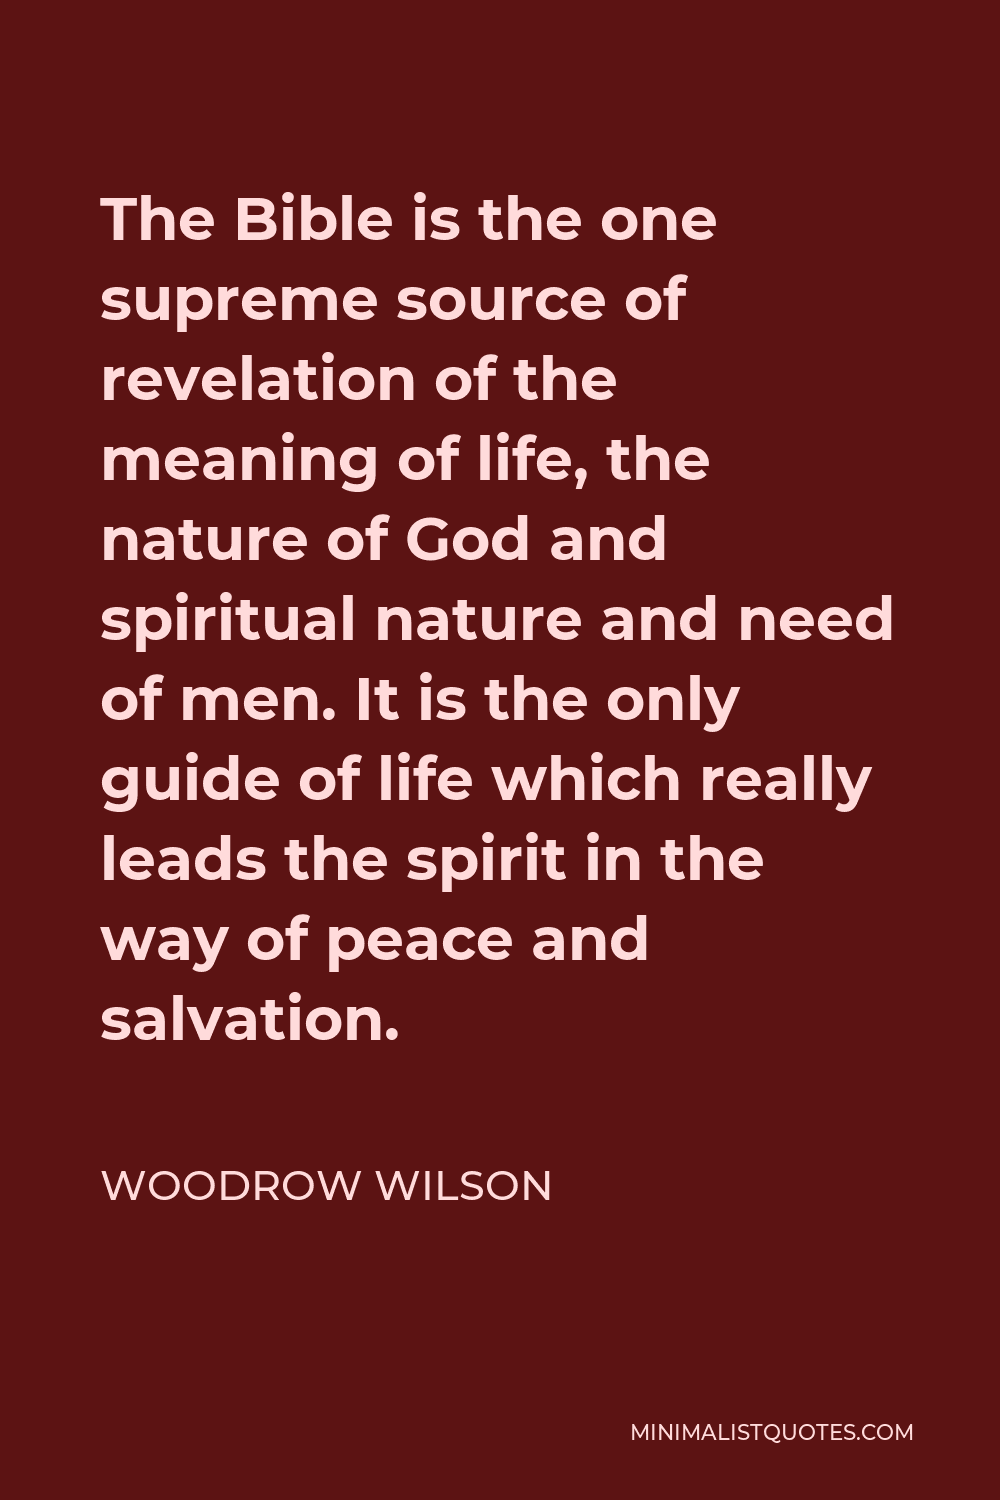 Woodrow Wilson Quote - The Bible is the one supreme source of revelation of the meaning of life, the nature of God and spiritual nature and need of men. It is the only guide of life which really leads the spirit in the way of peace and salvation.